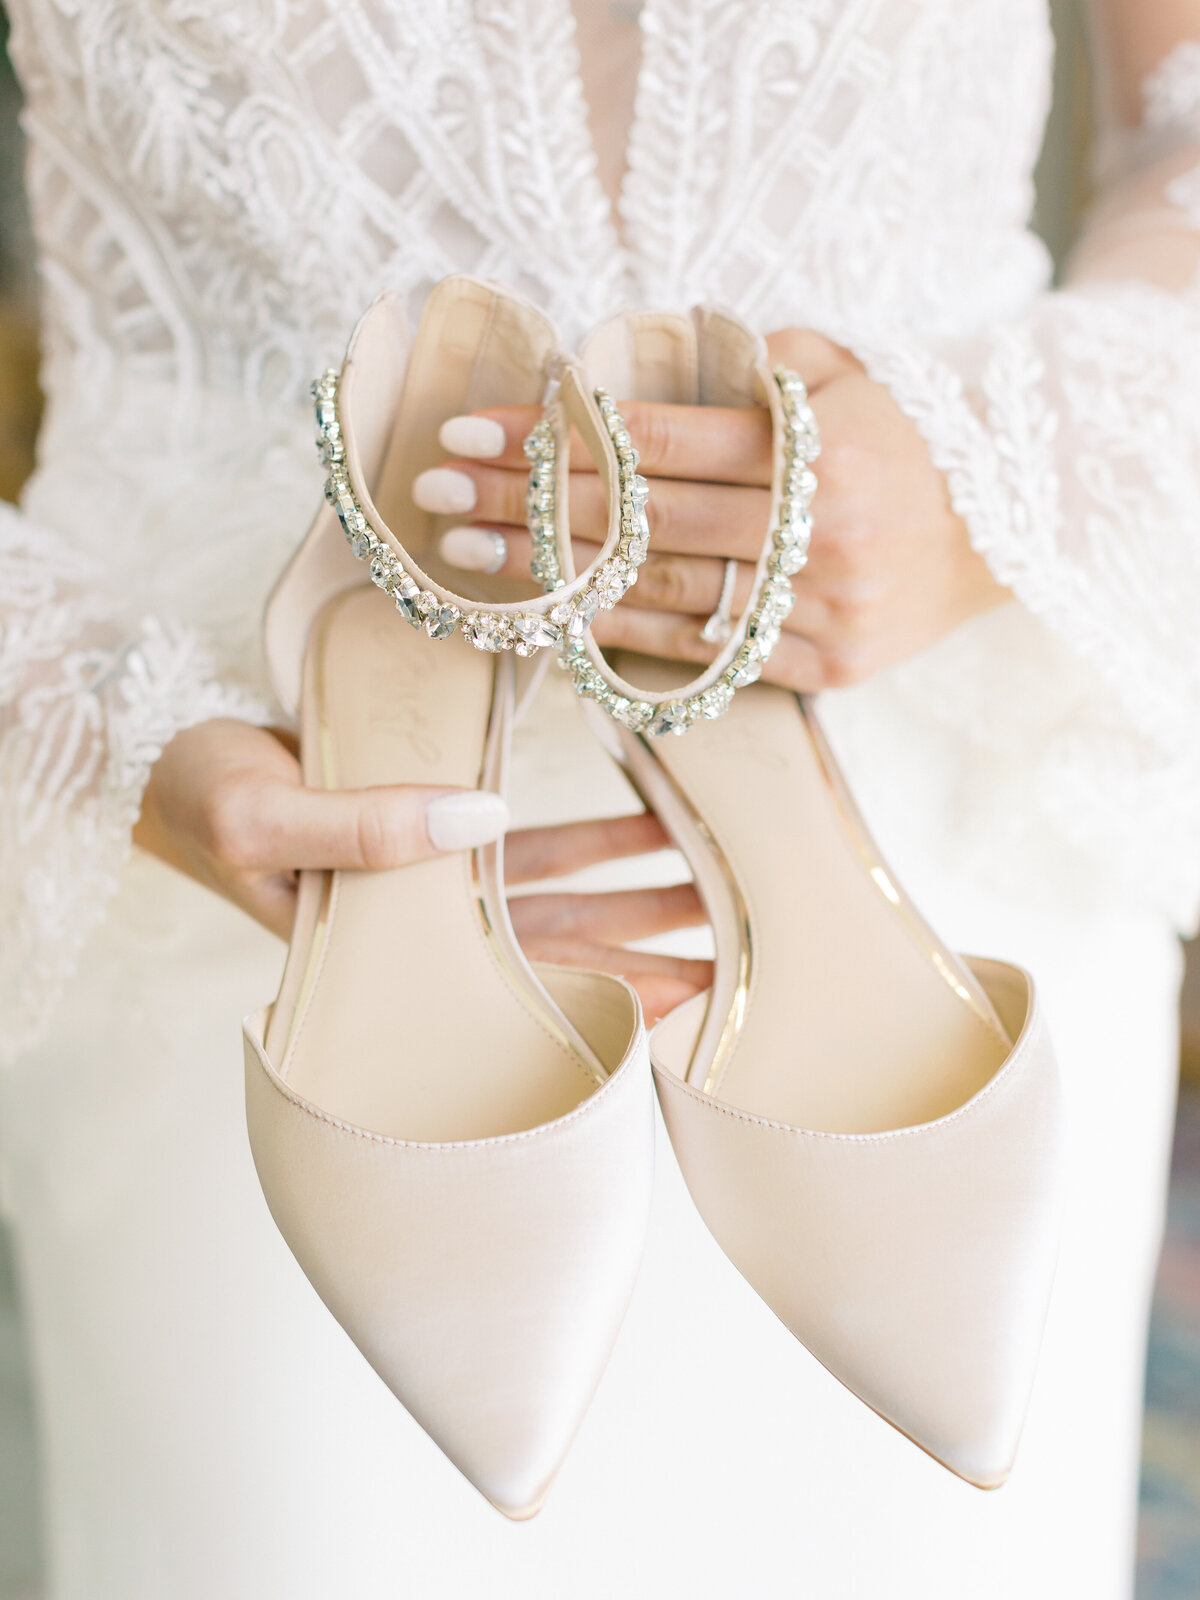 bride holding bridal shoes with jewels